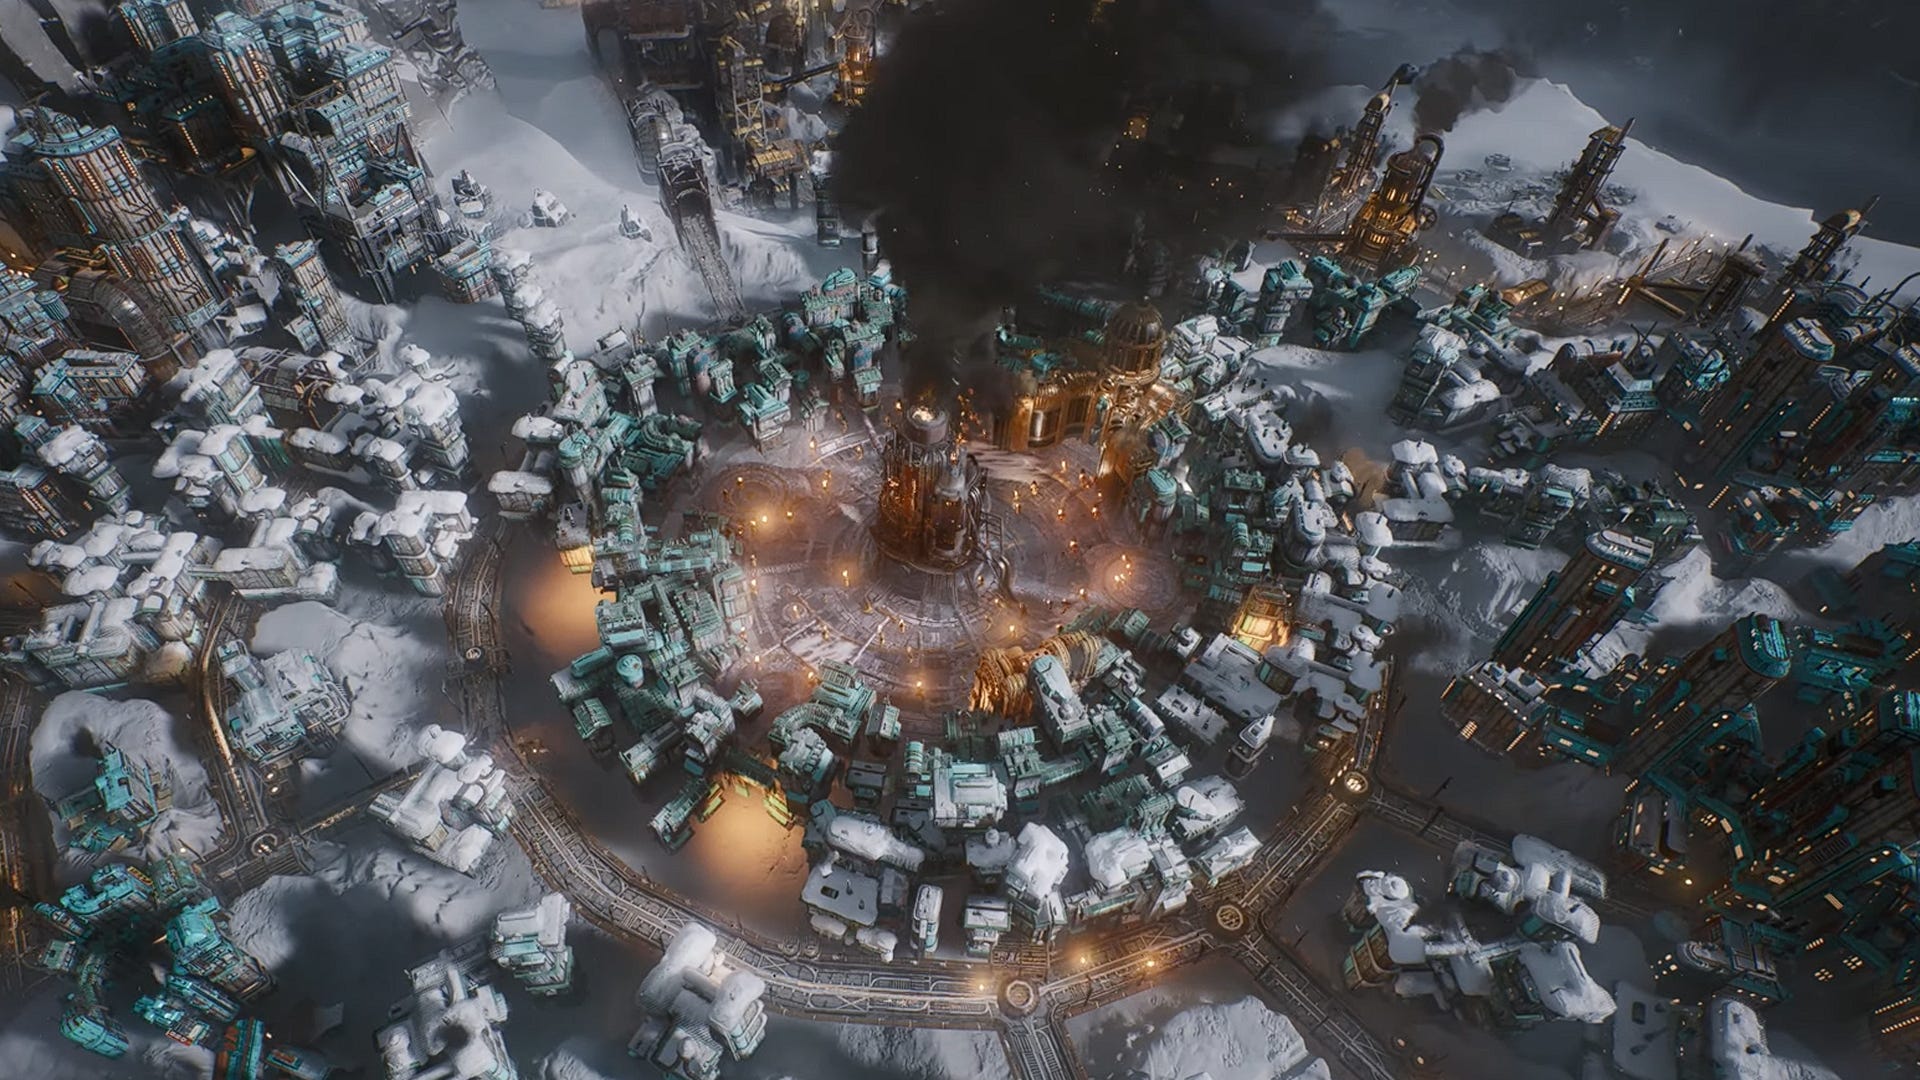 Frostpunk 2's closed beta kicks off April 15th for those willing to pre-order